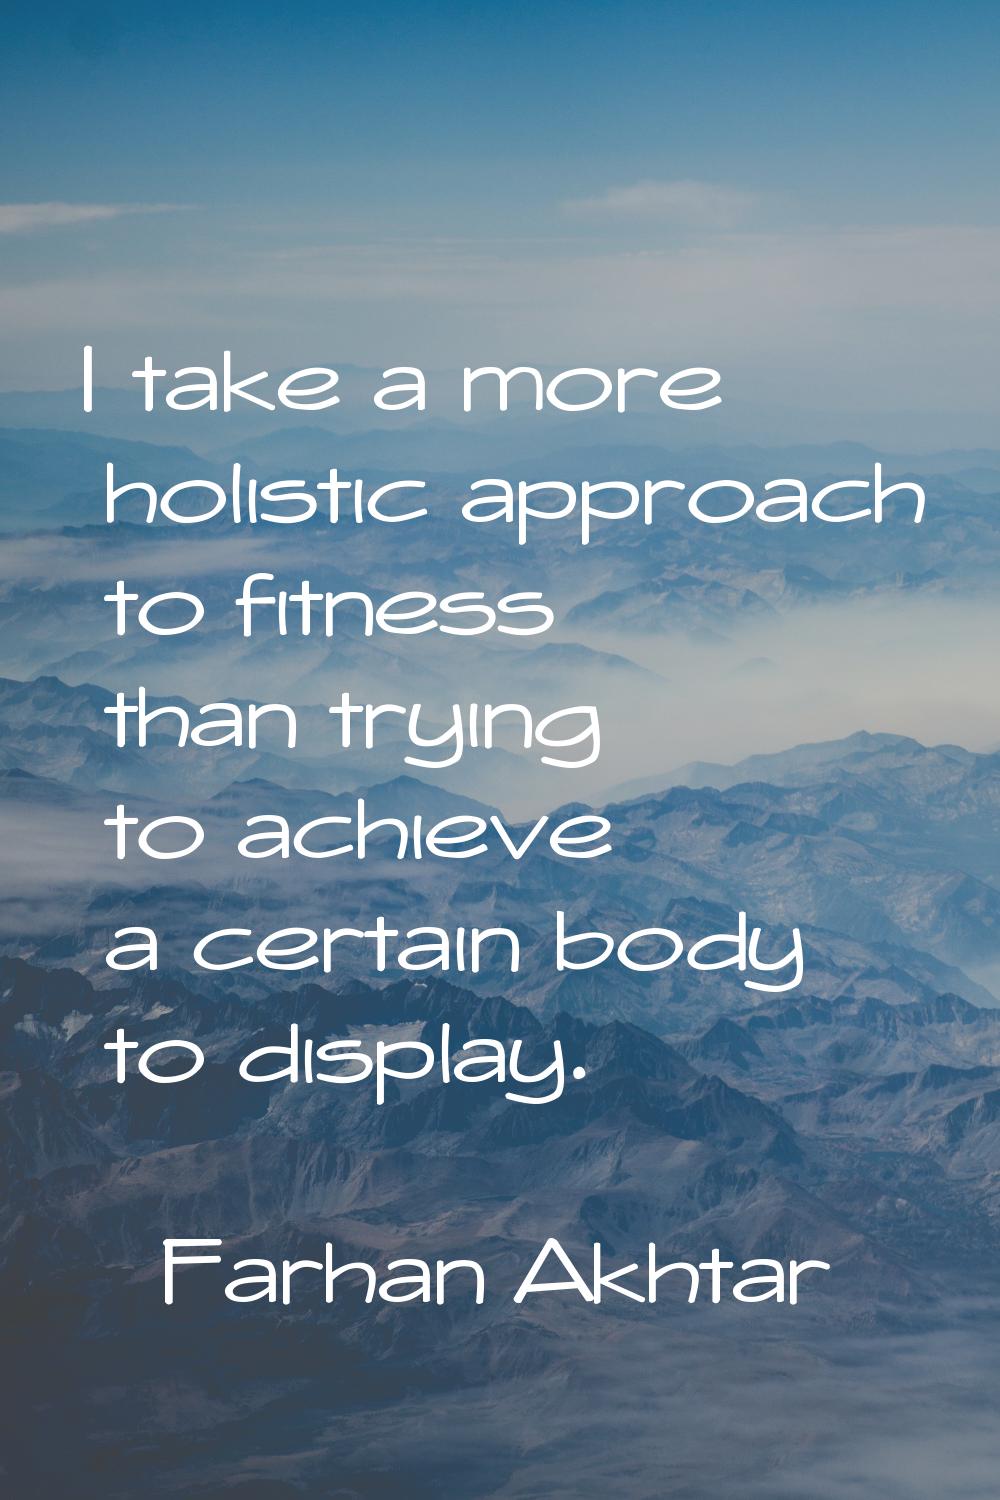 I take a more holistic approach to fitness than trying to achieve a certain body to display.